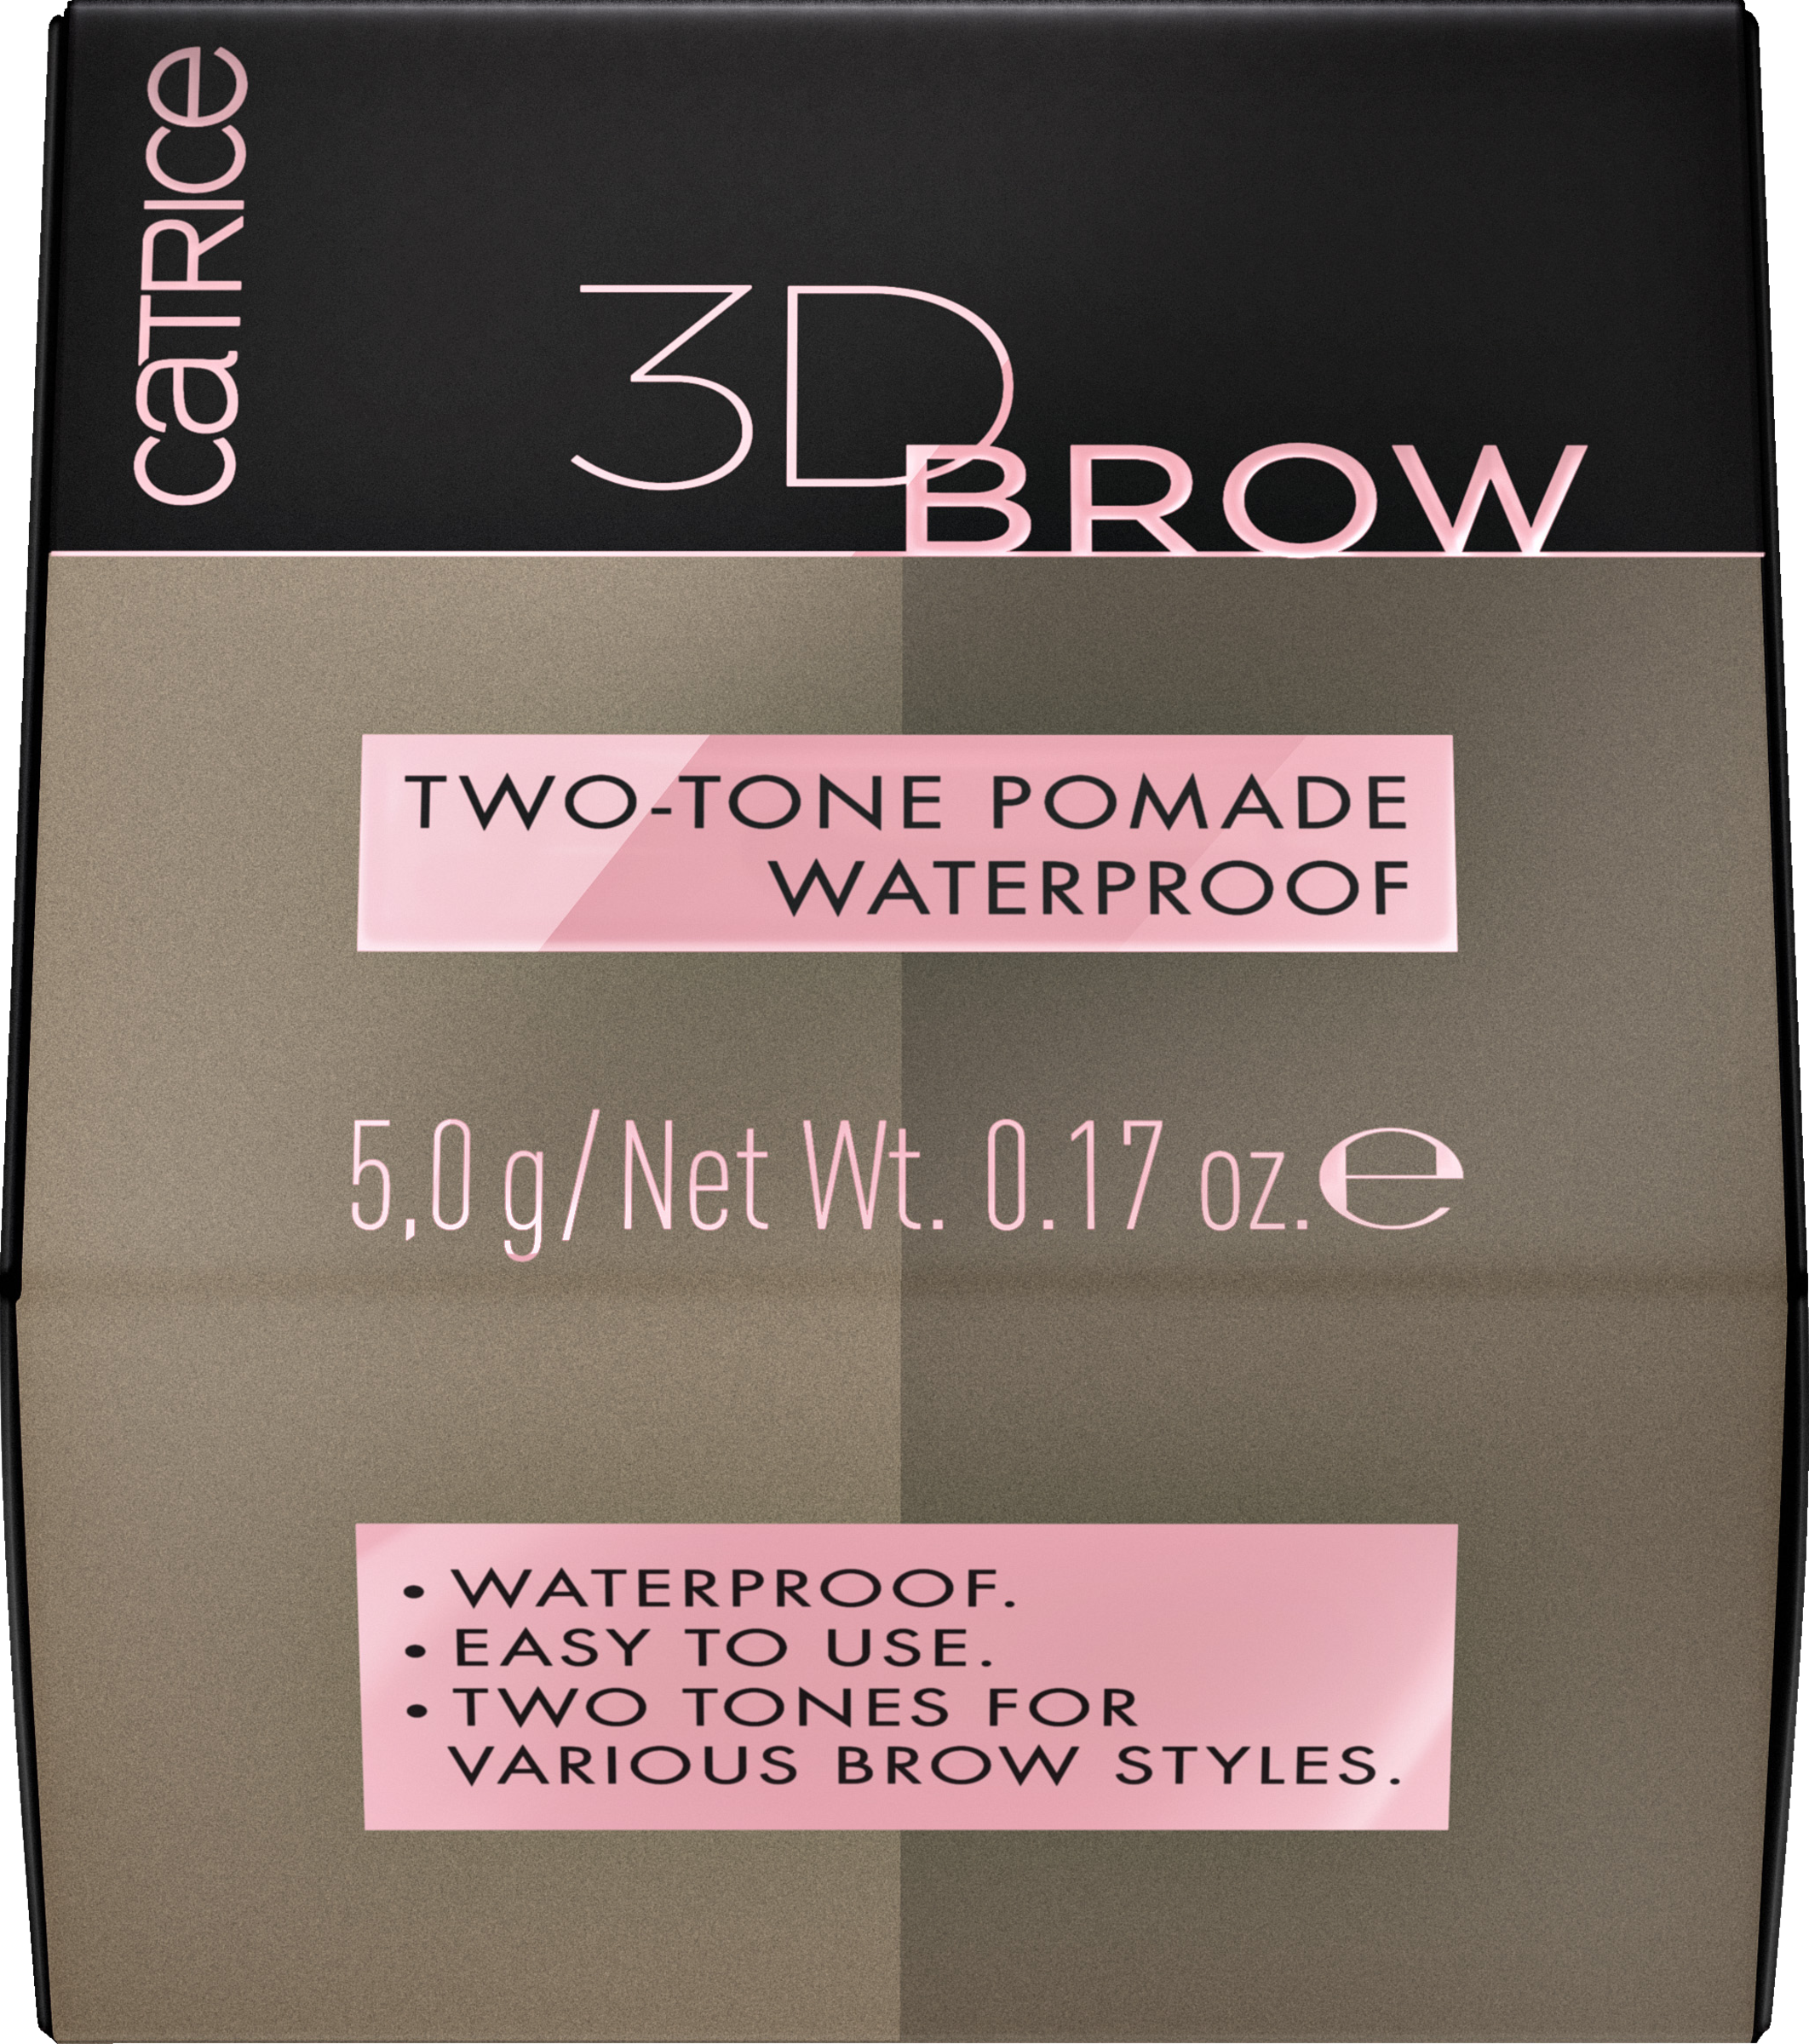 Catrice 3D Brow Two-Tone Pomade Waterproof 010